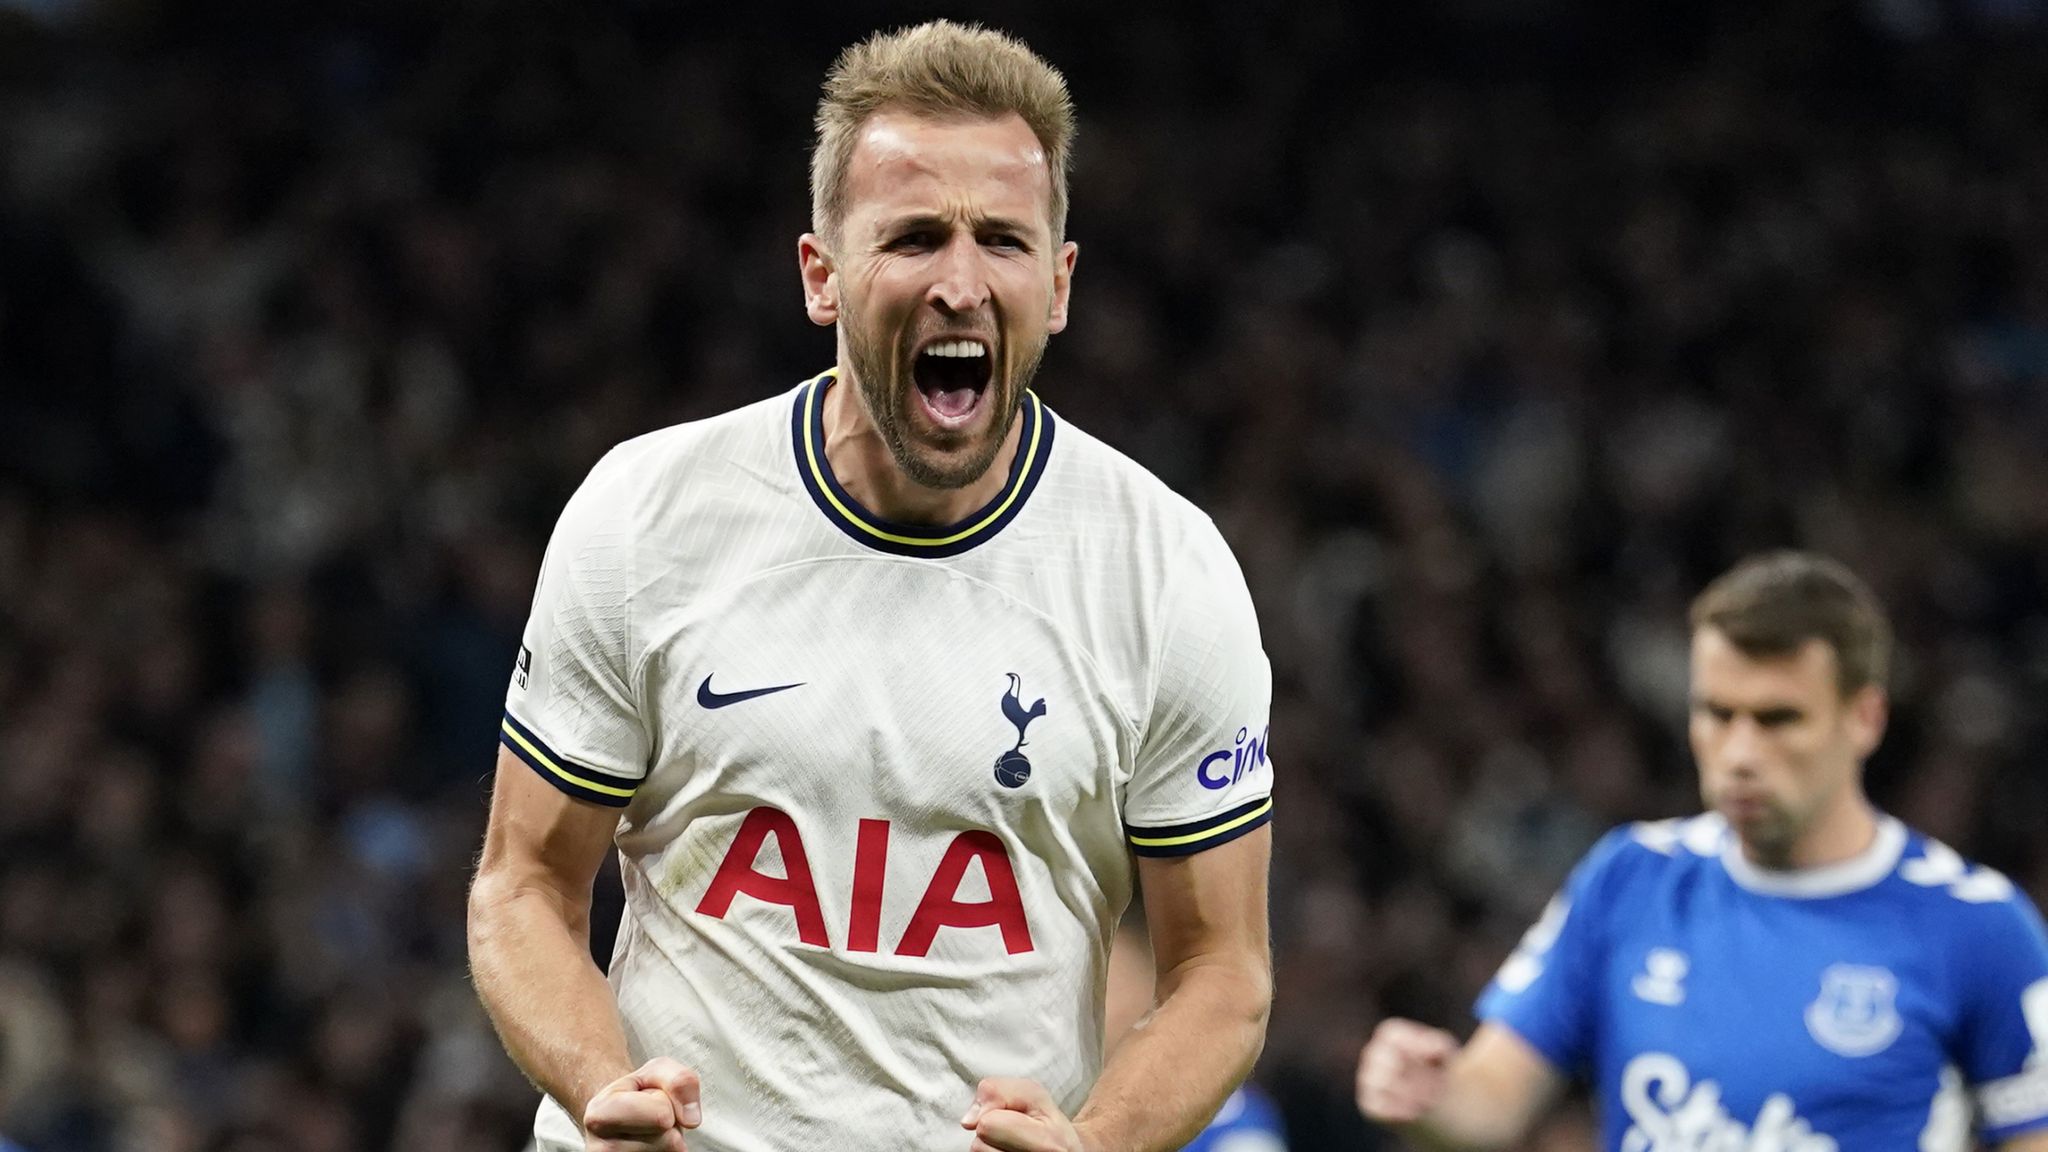 Tottenham 2-0 Everton Harry Kanes penalty and a Pierre-Emile Hojbjerg deflected strike seal win for Spurs Football News Sky Sports